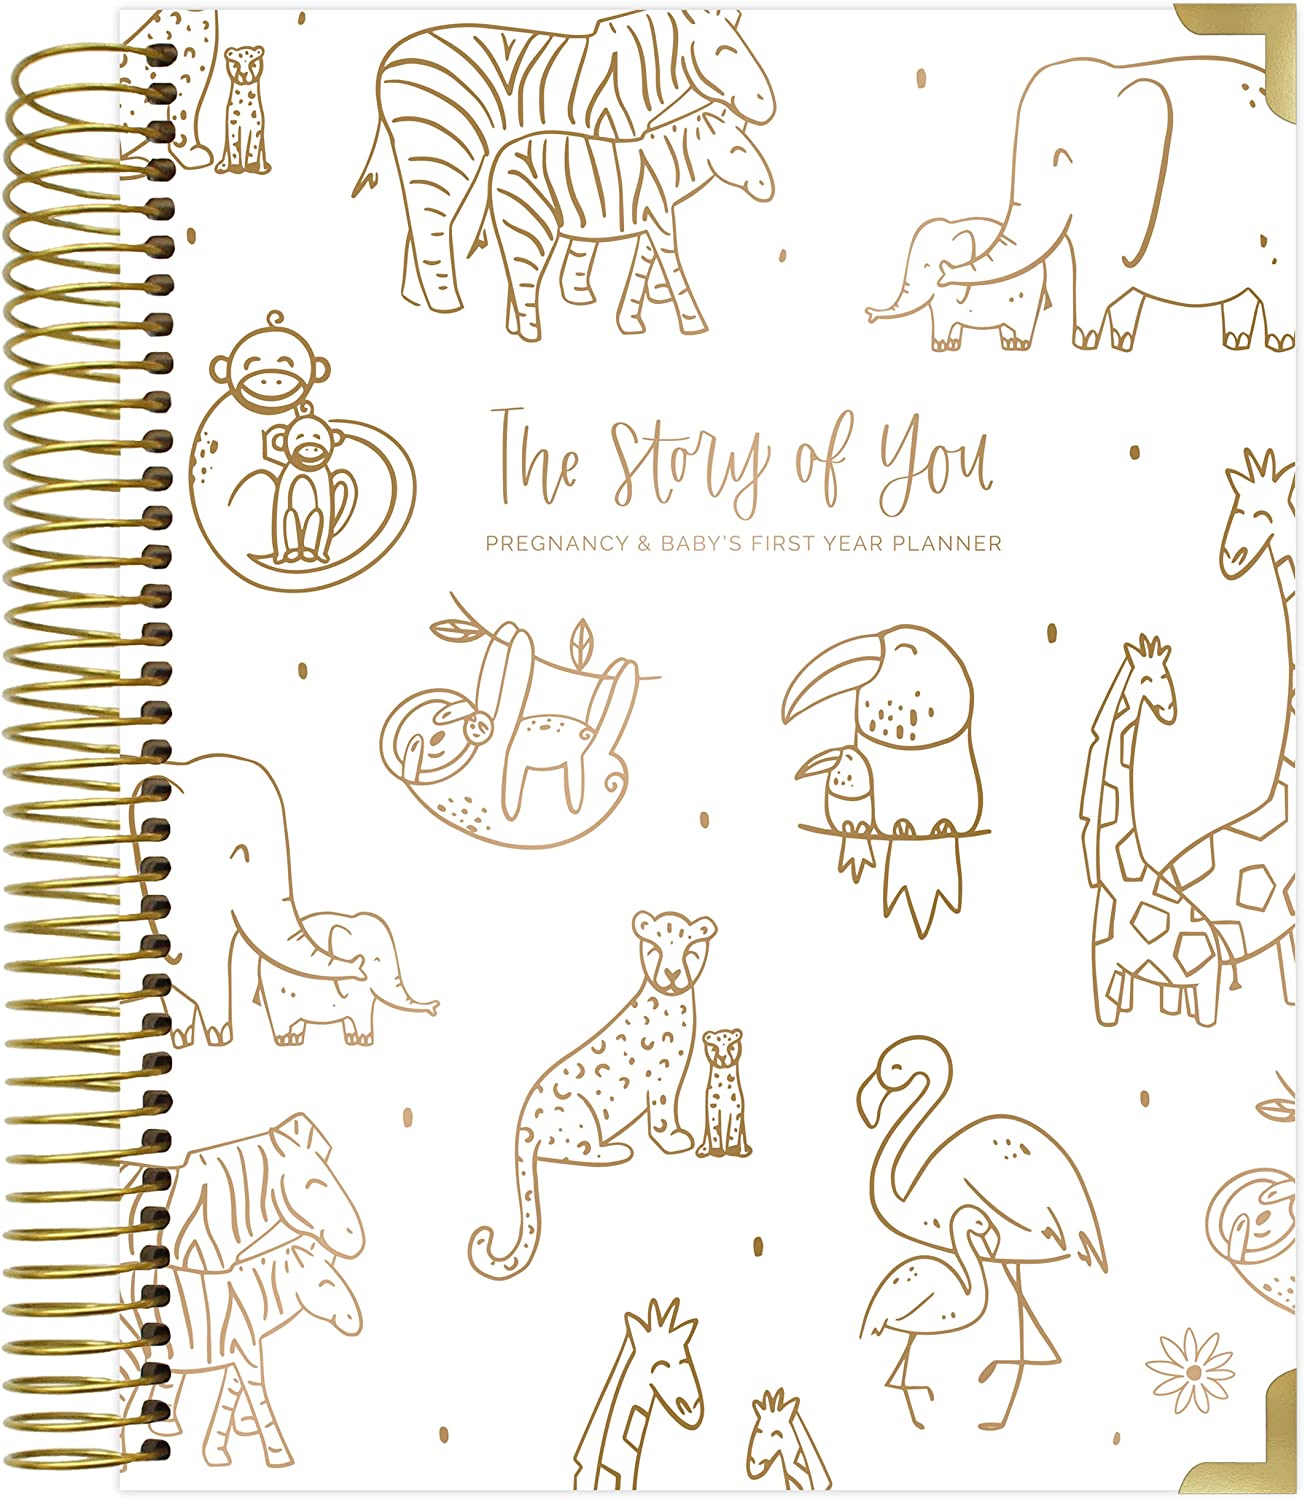 New Pregnancy and Baby's First Year Calendar Planner from bloom daily planners